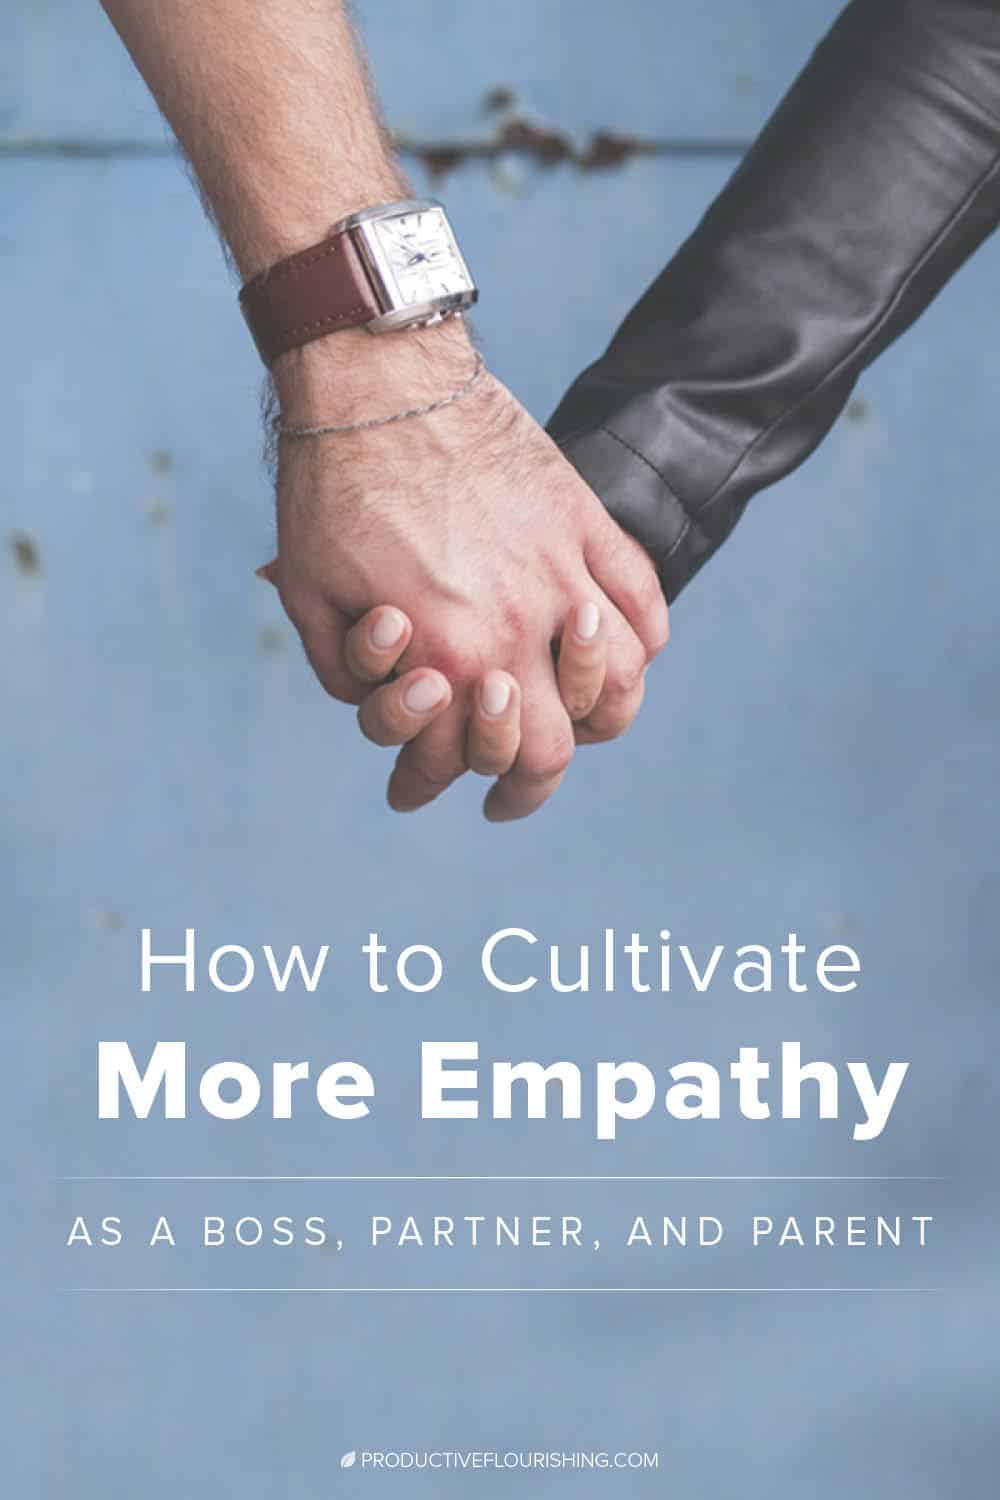 Read these four tips to create more mutual empathy as a boss, partner and parent. #productiveflourishing #healthyrelationships #mindset